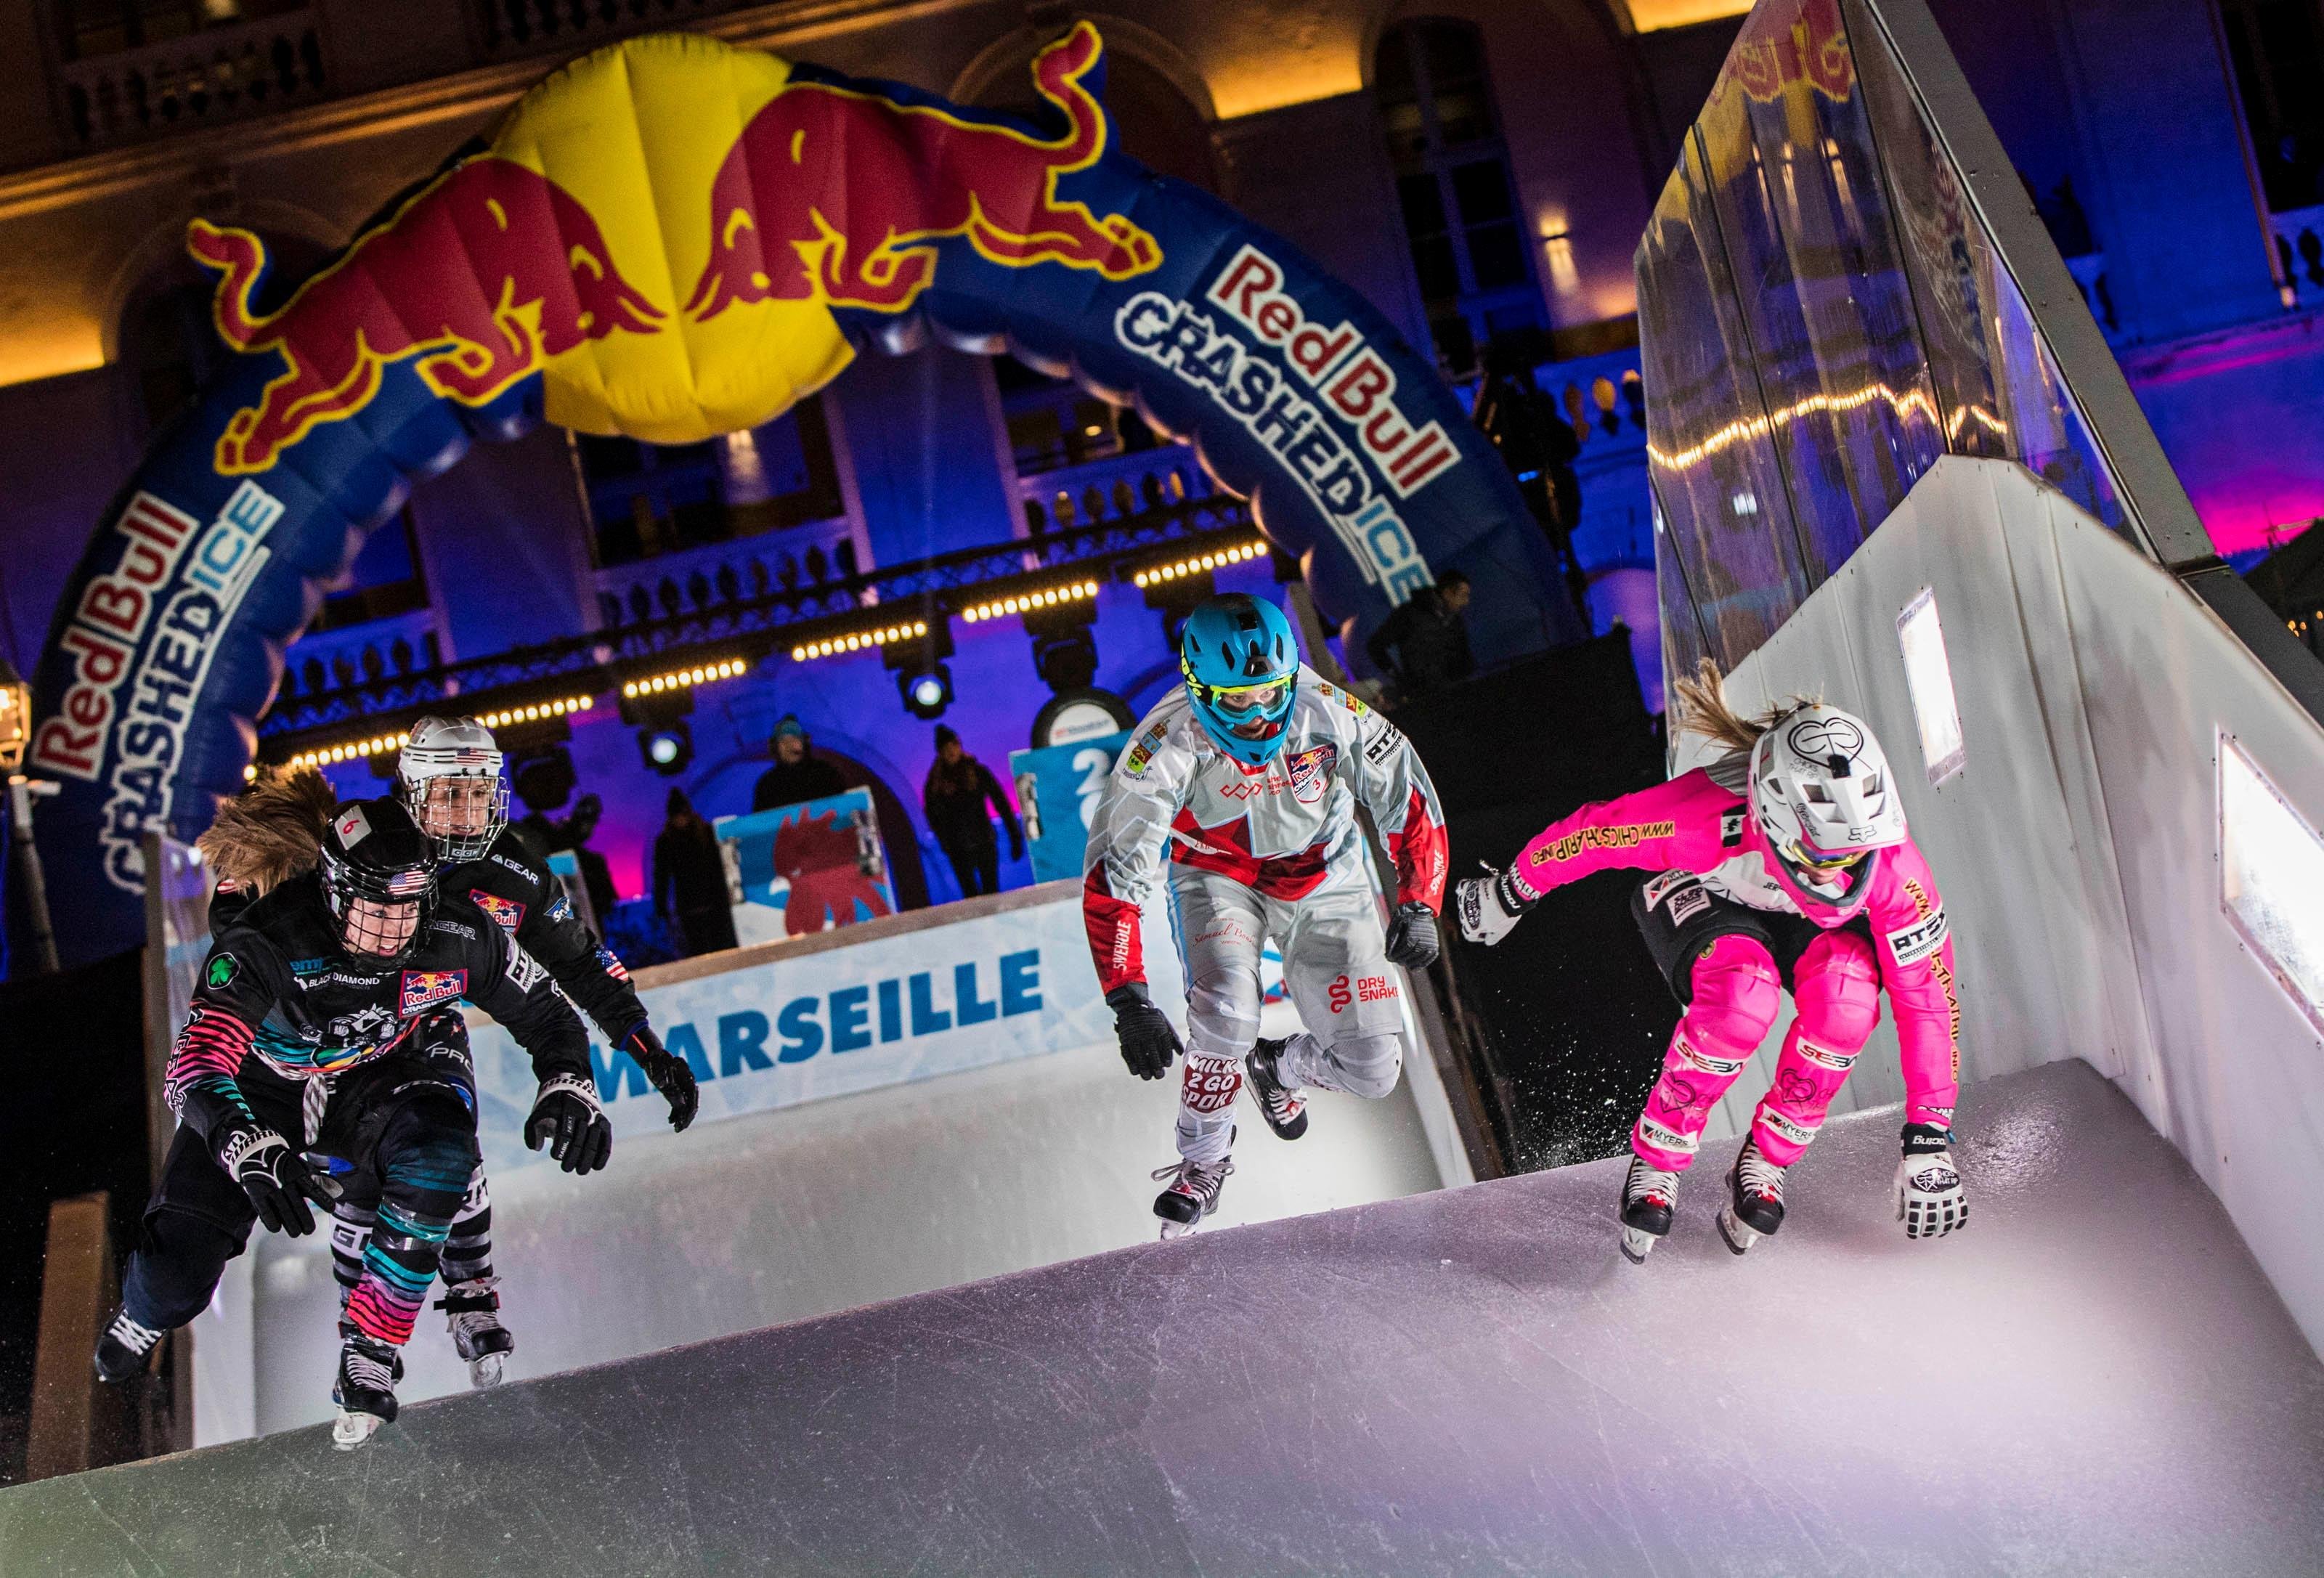 Jacqueline Legere of Canada, Amanda Trunzo of the United States, Sydney O'keefe of the United States and Myriam Trepanier of Canada compete during the finals of Women at the first stage of the ATSX Ice Cross Downhill World Championship at the Red Bull Crashed Ice in Marseille, France on January 14, 2017.